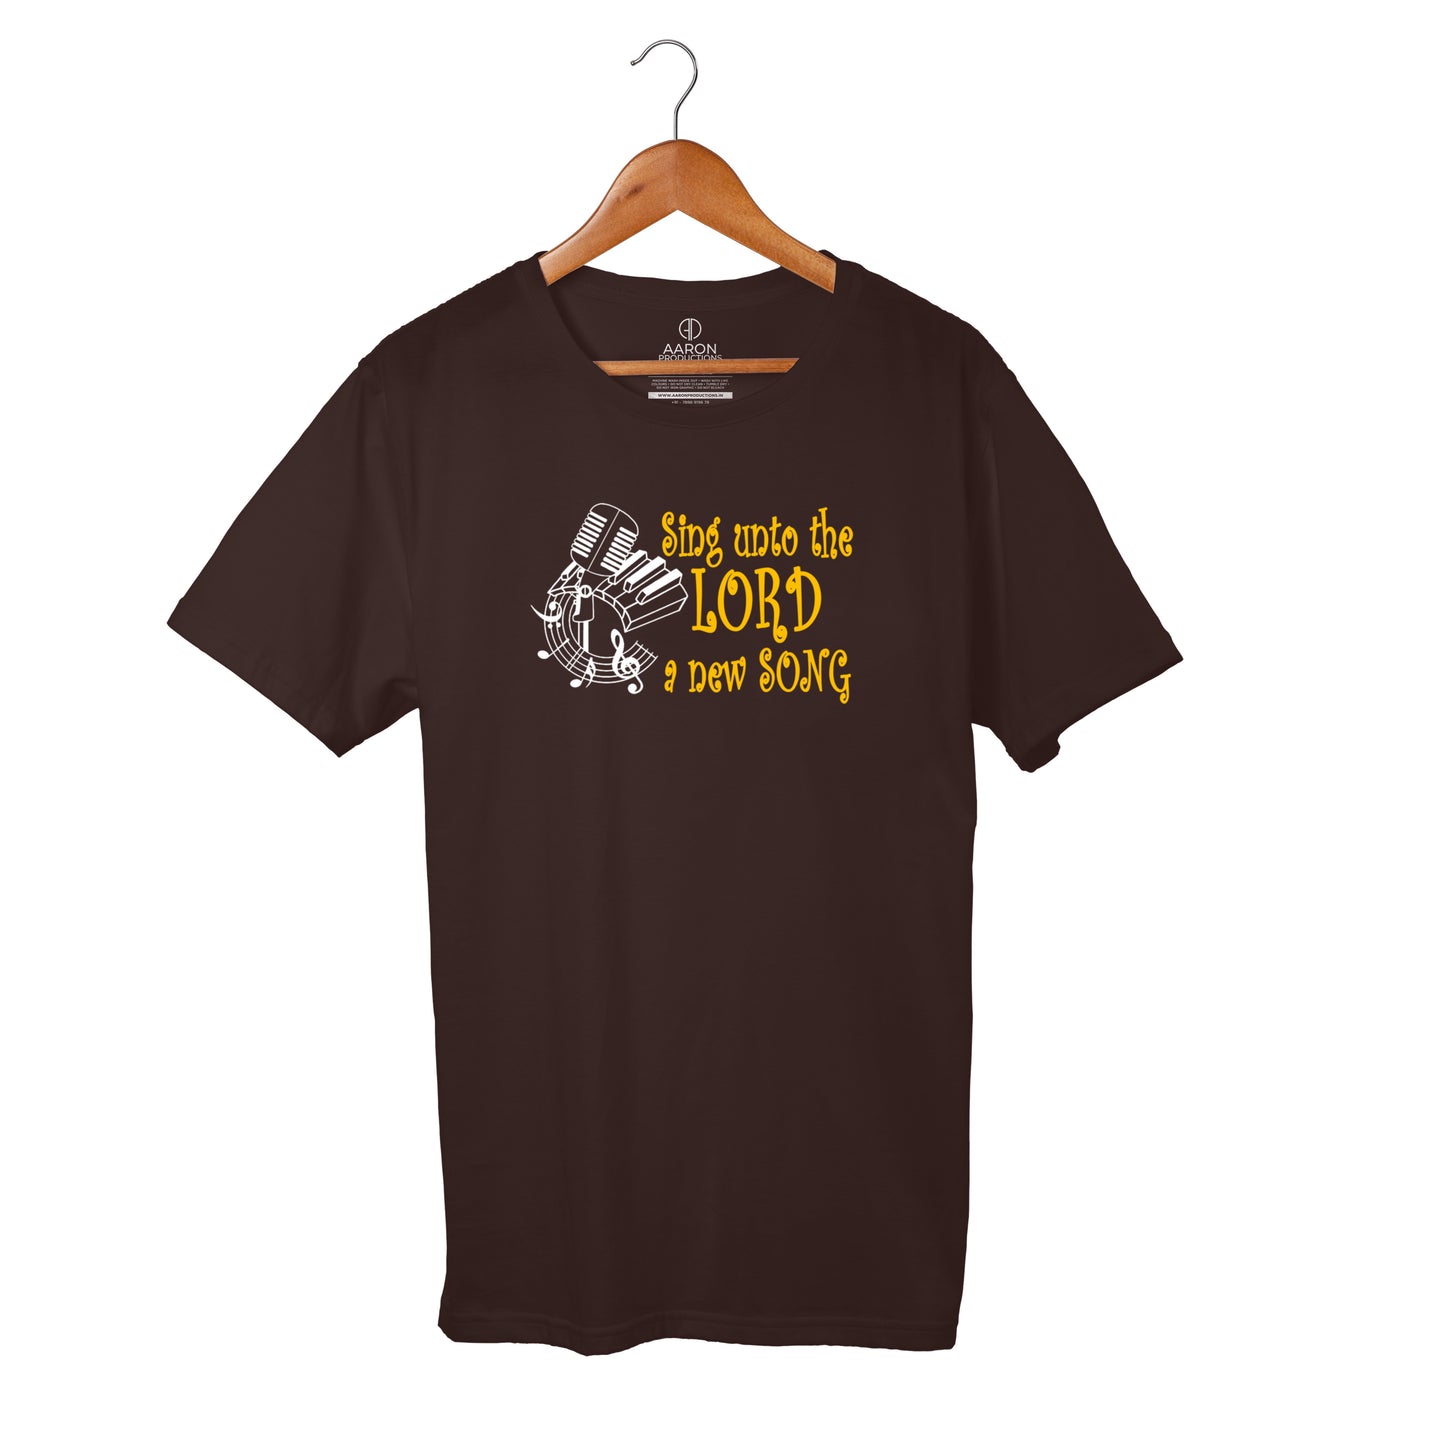 Sing unto the Lord - Men T-shirts